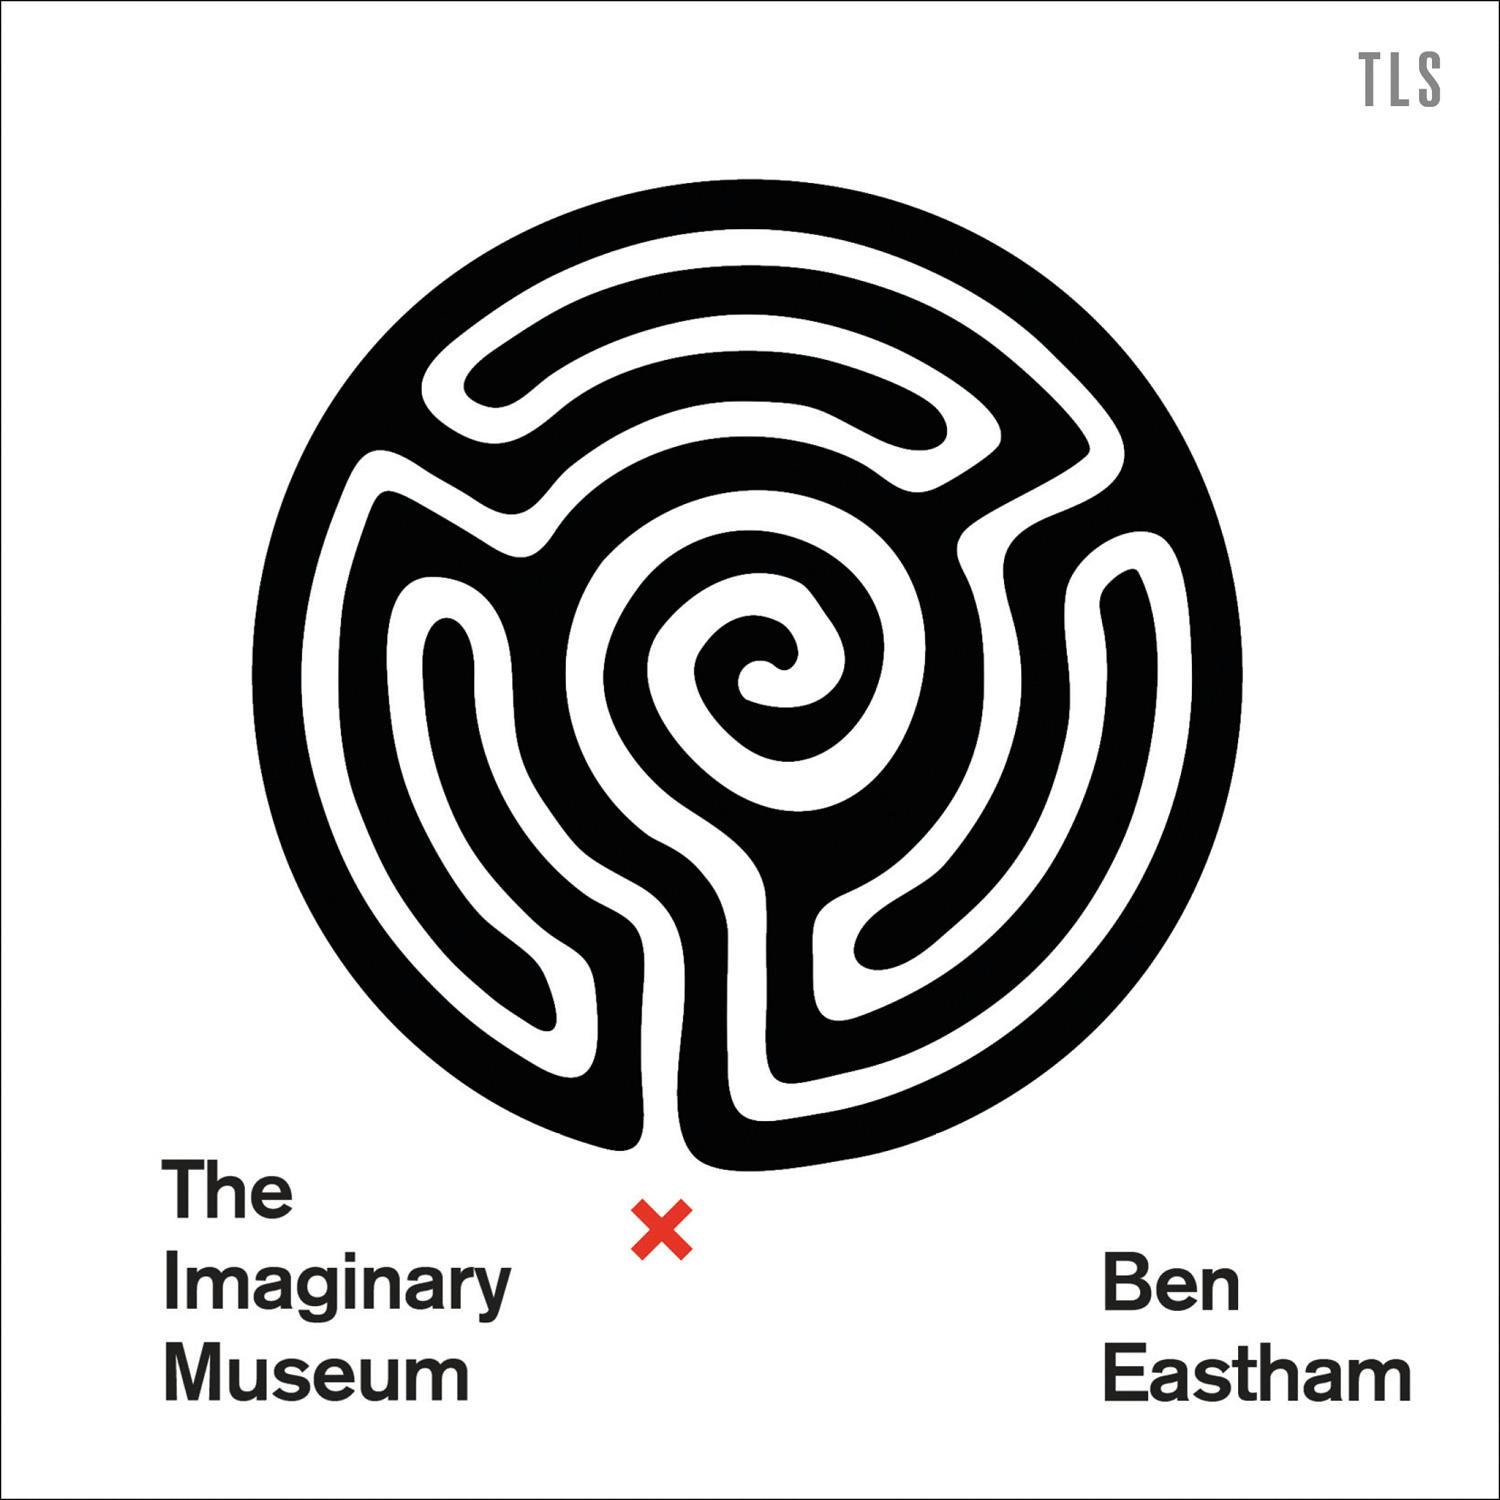 The Imaginary Museum: A Personal Tour of Contemporary Art featuring ghosts, nudity and disagreements - Ben Eastham